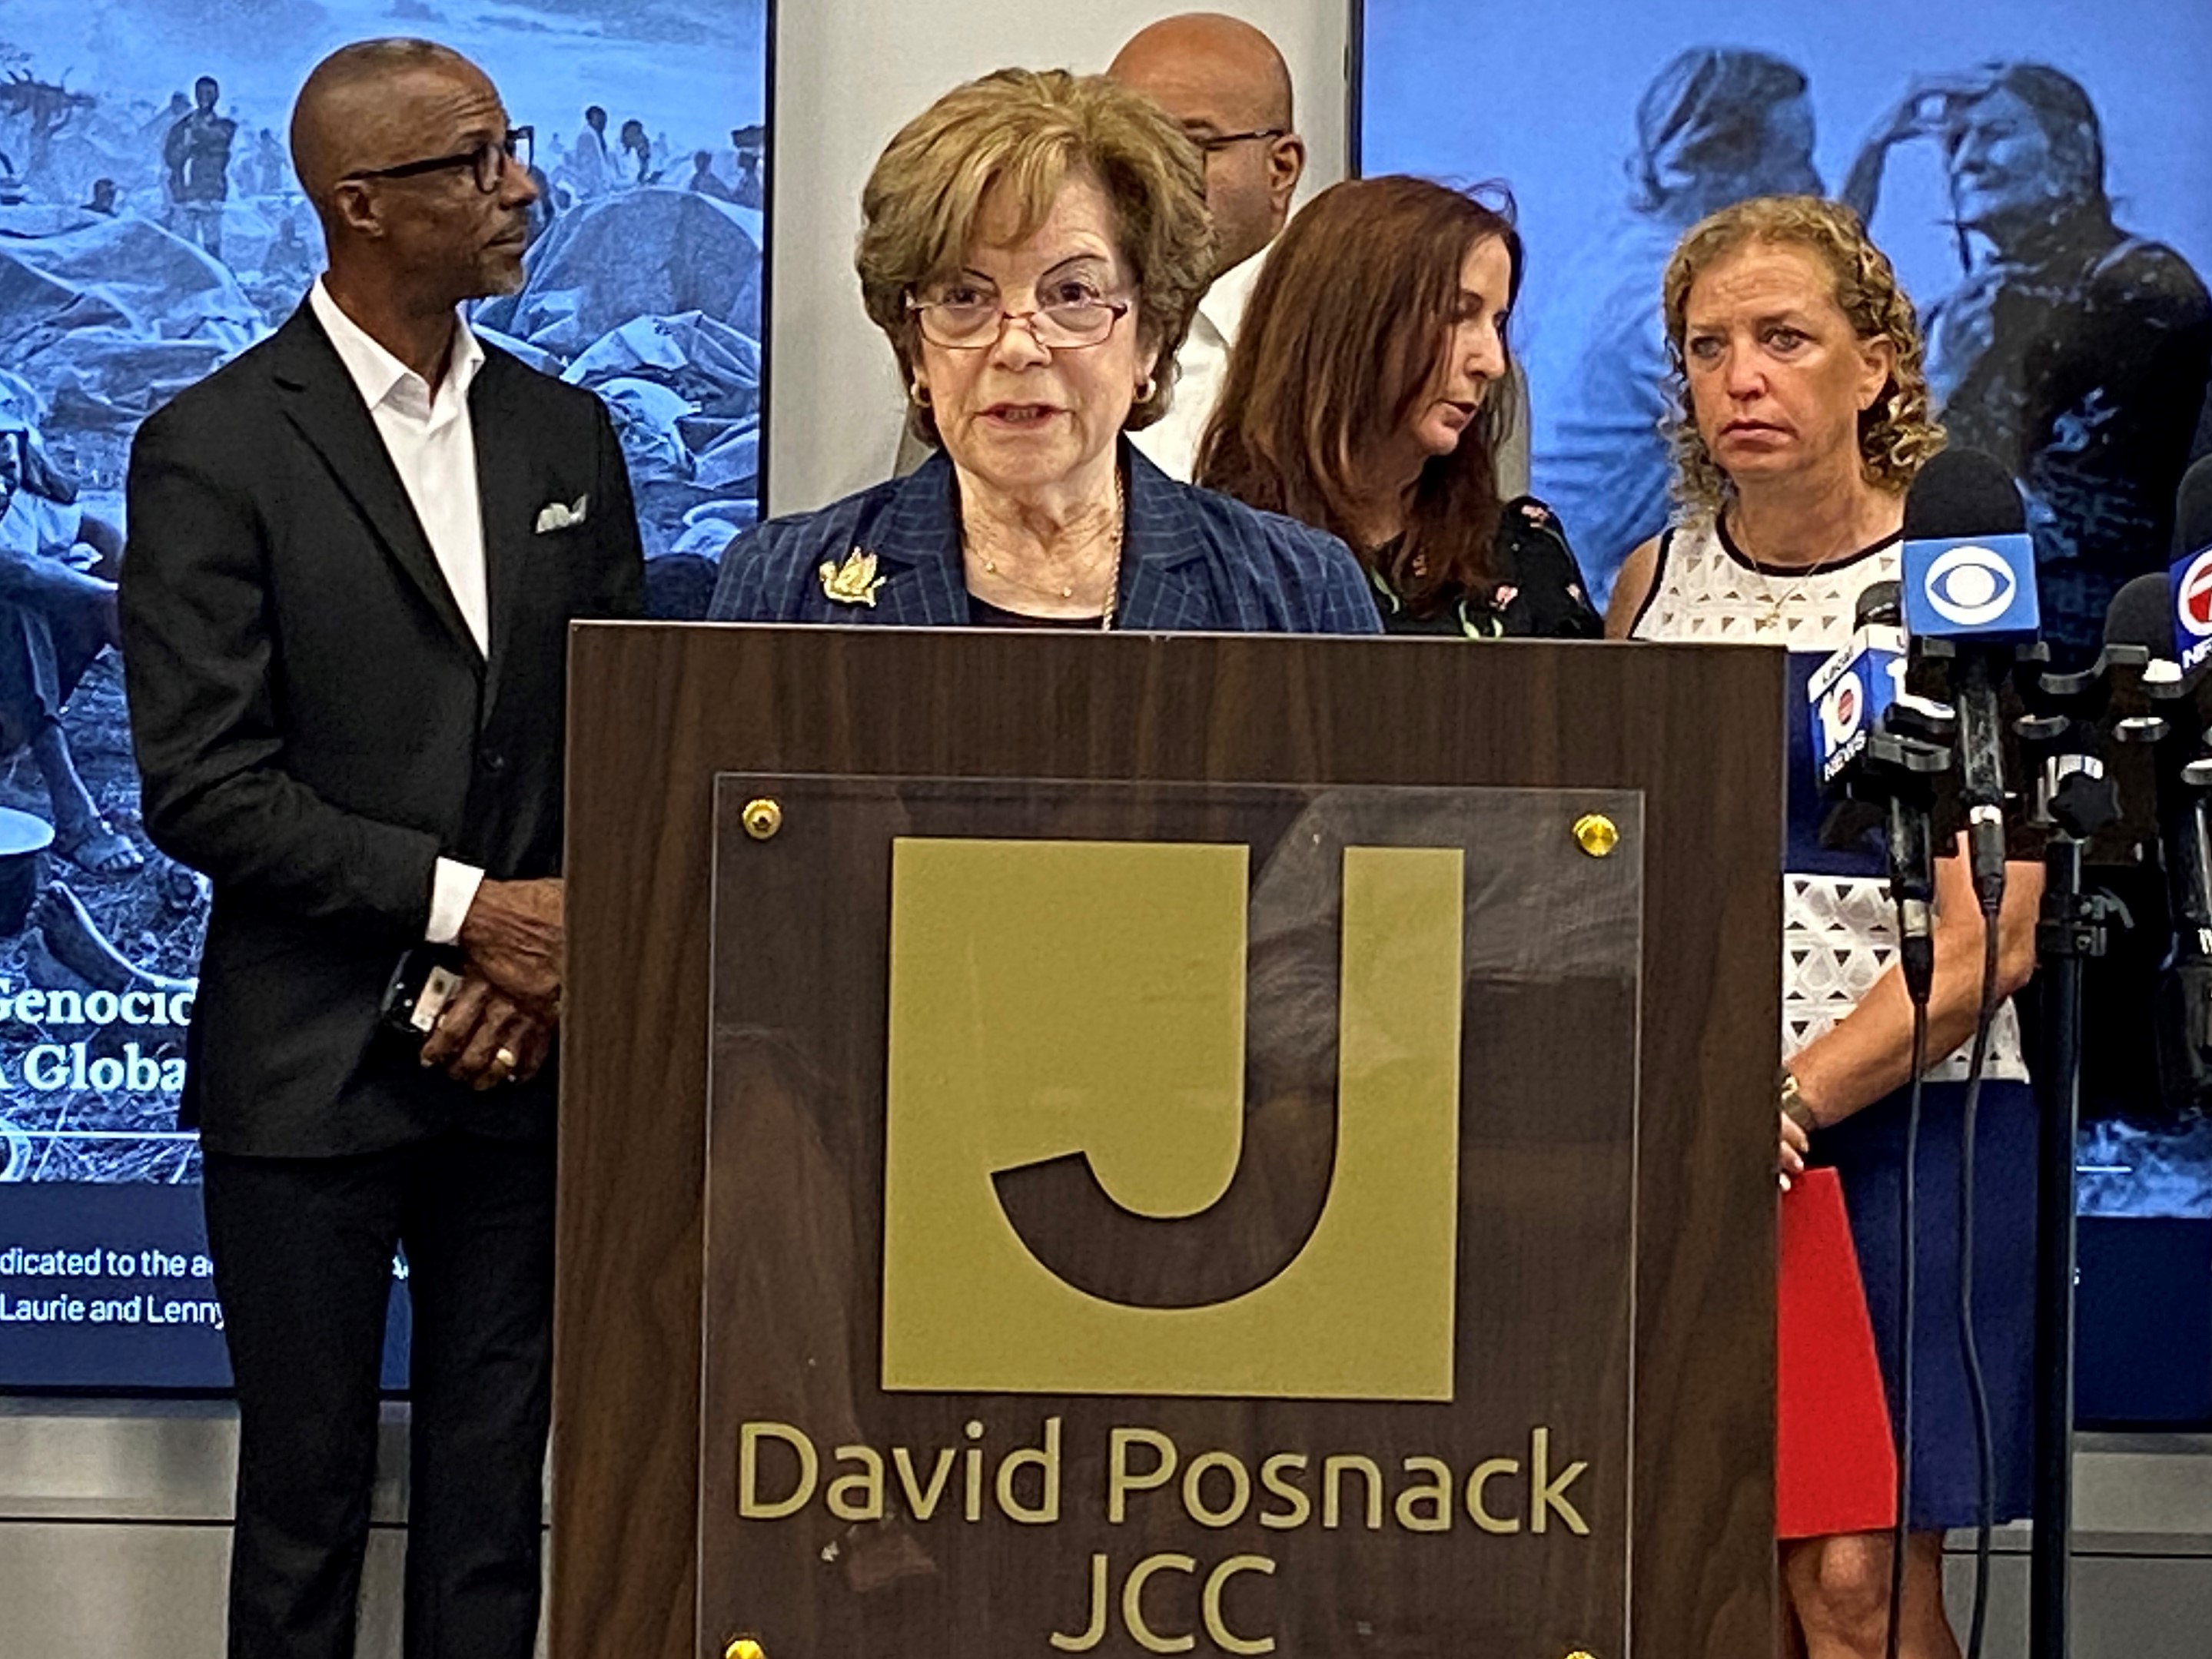 Broward Commissioner Nan Rich at a news conference today to talk about recent antisemitic and racist acts in NE Florida and in the City of Weston.